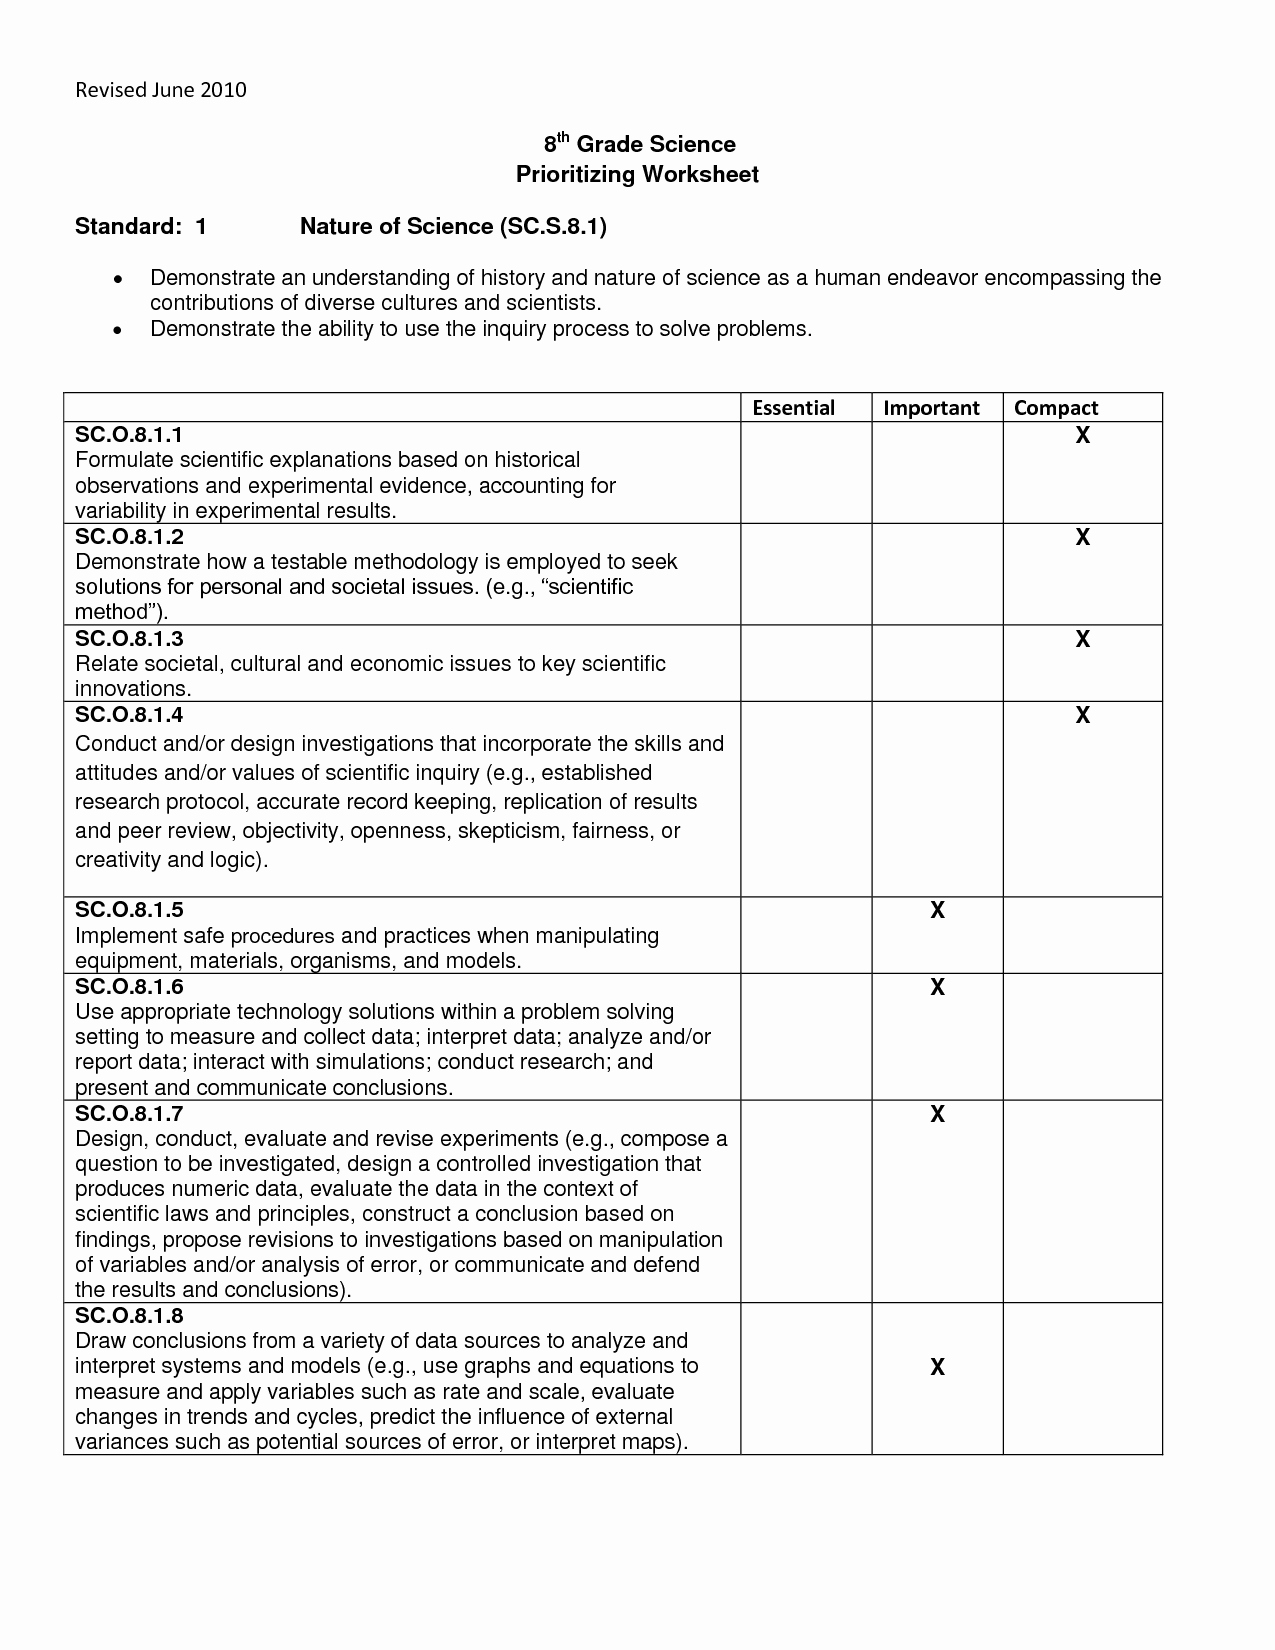 Free 8th Grade Science Worksheets Fresh 8th Grade Science Worksheets Pdf